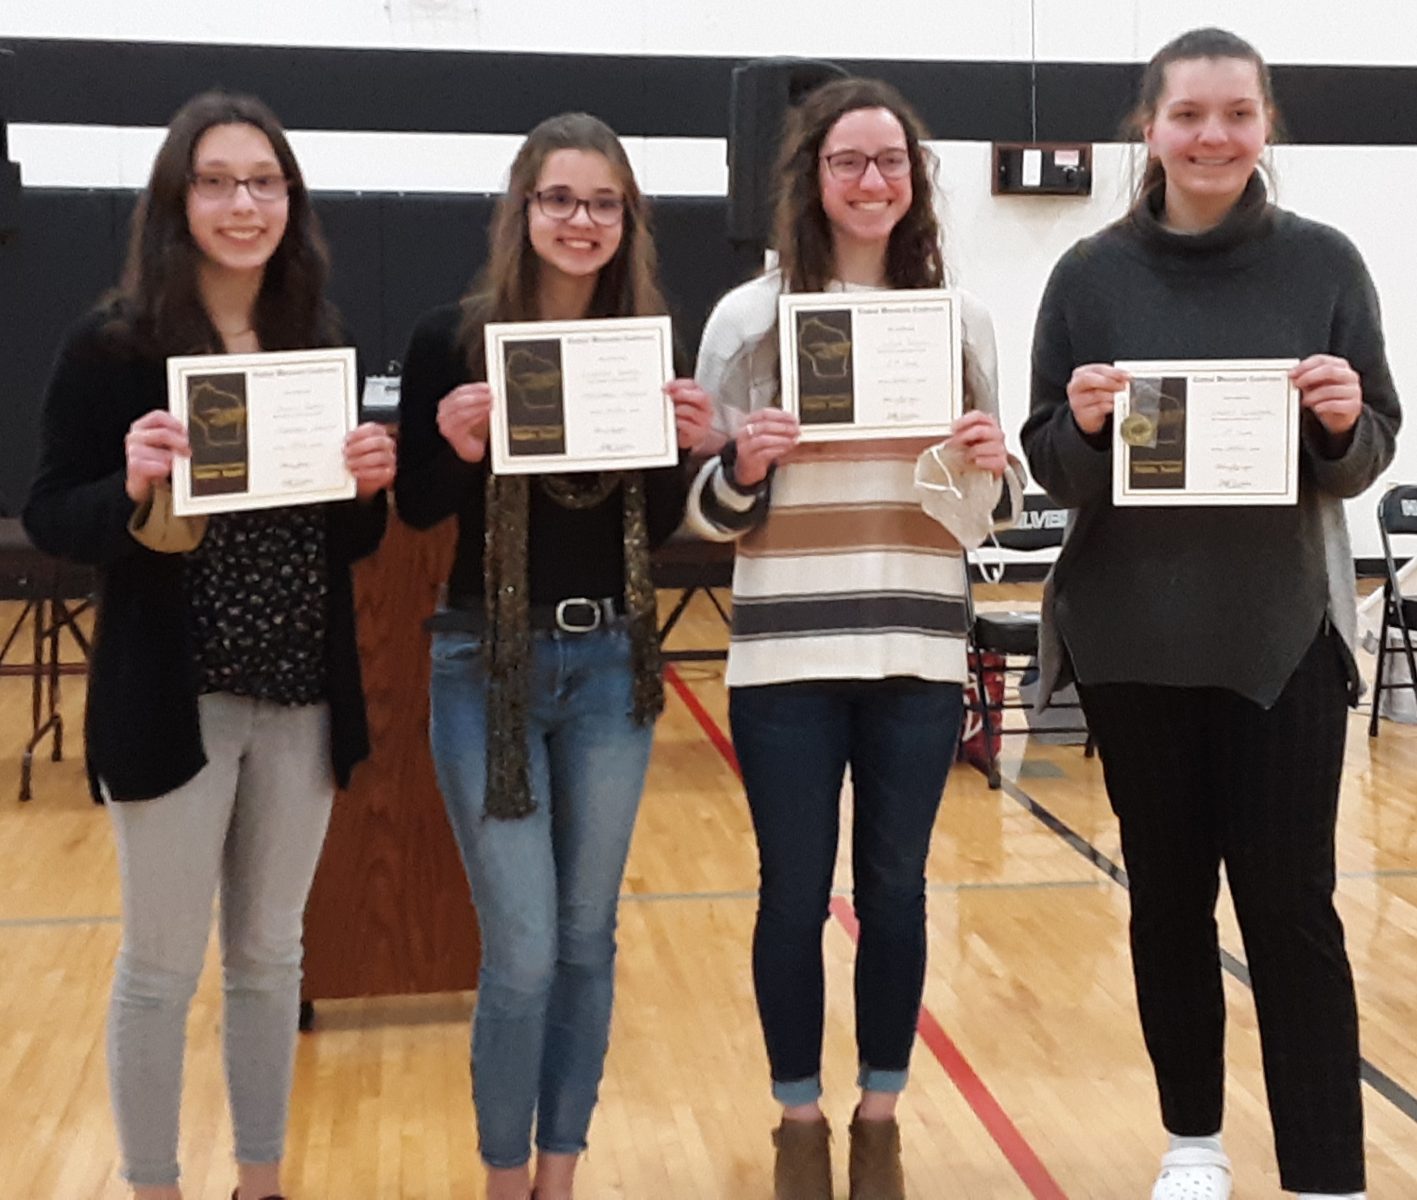 2020 Volleyball All-Conference winners